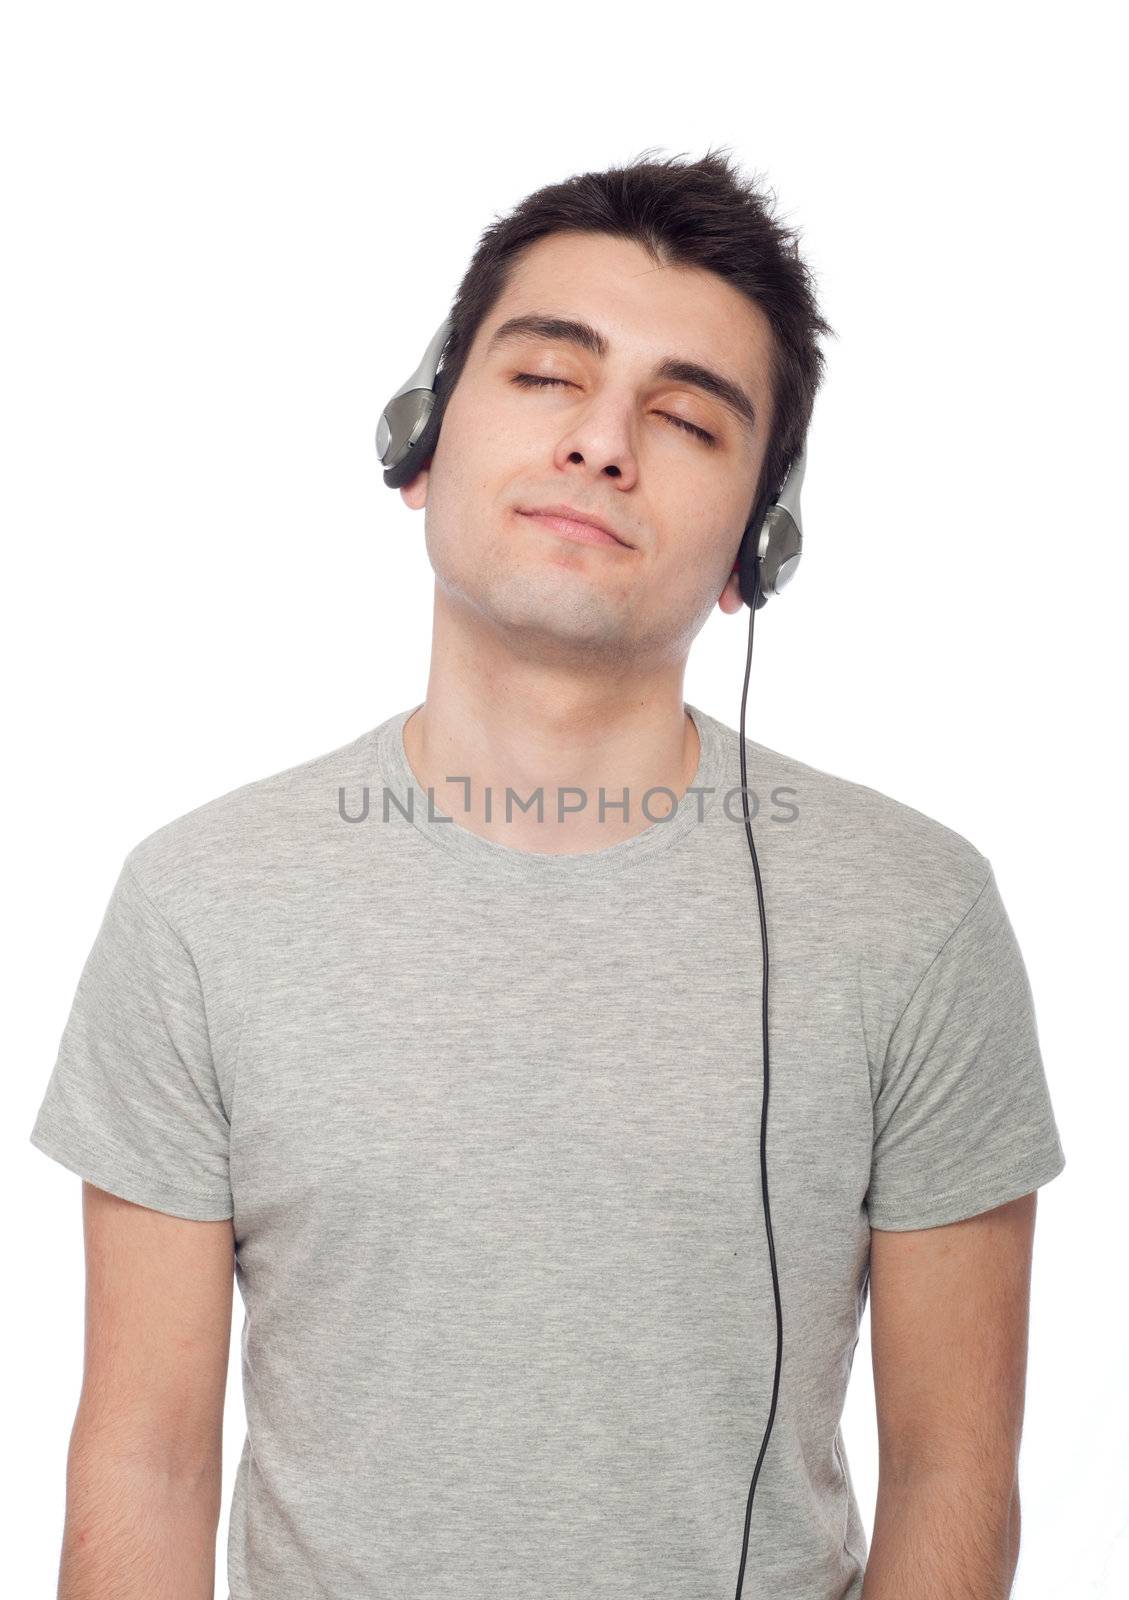 quiet casual young man listening music on headphones (isolated on white background)